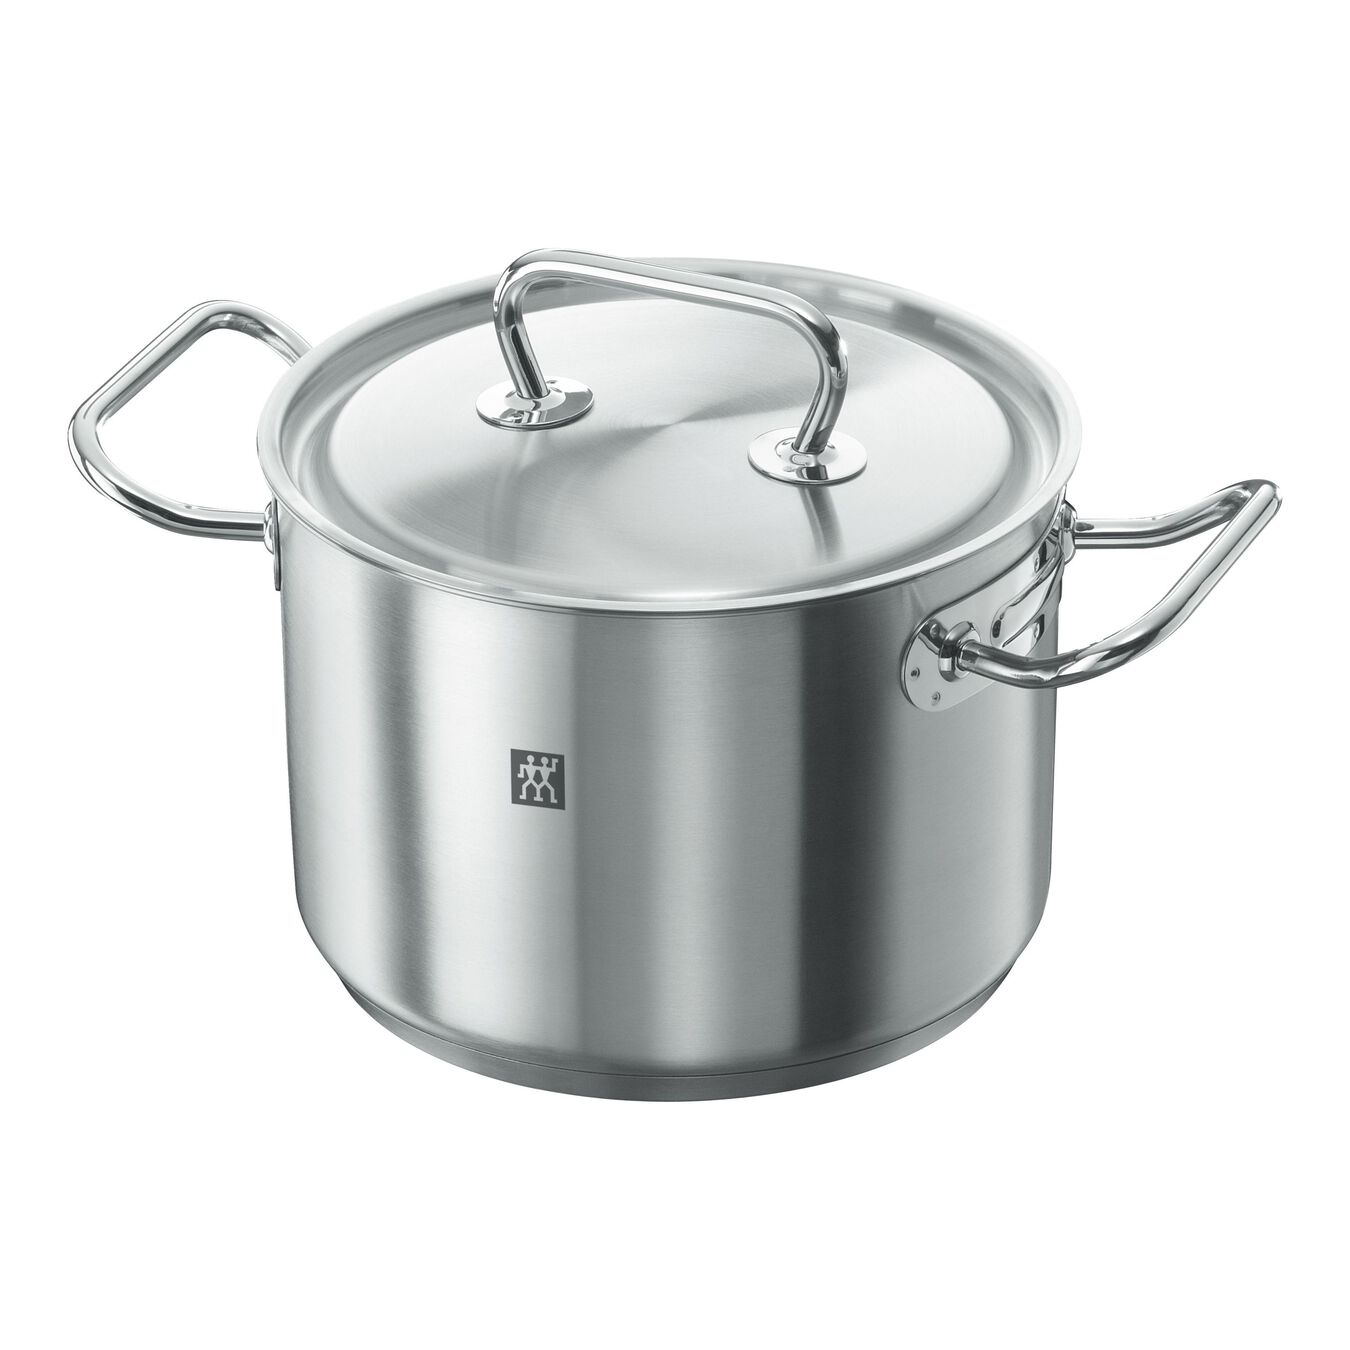 20 cm 18/10 Stainless Steel Stock pot,,large 1